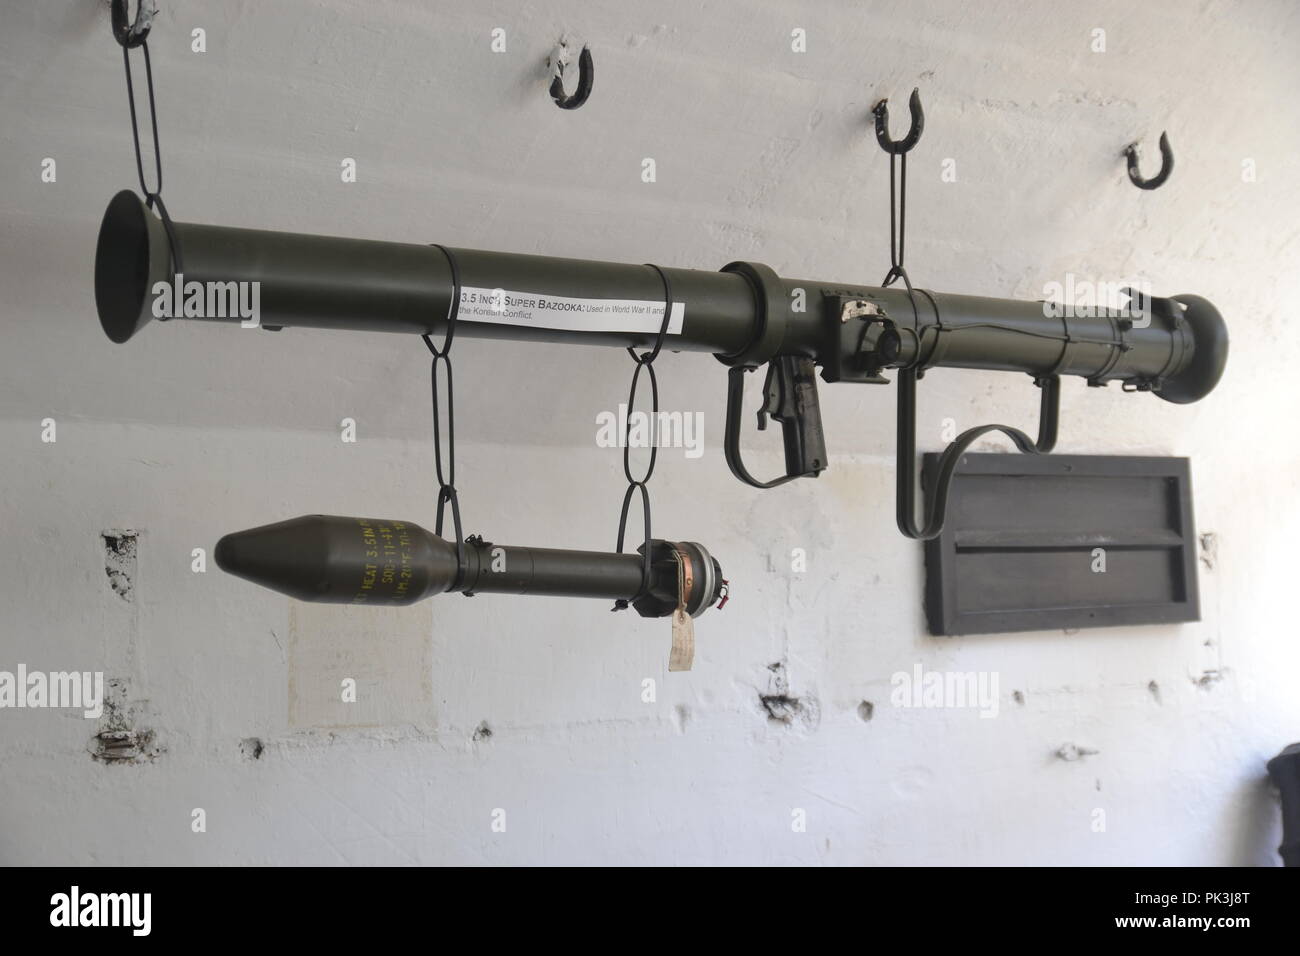 3.5 inch super bazooka used in WWII and Korean conflict. Chapel Bay Fort & Museum at Angle, Pembrokeshire, Wales, UK Stock Photo